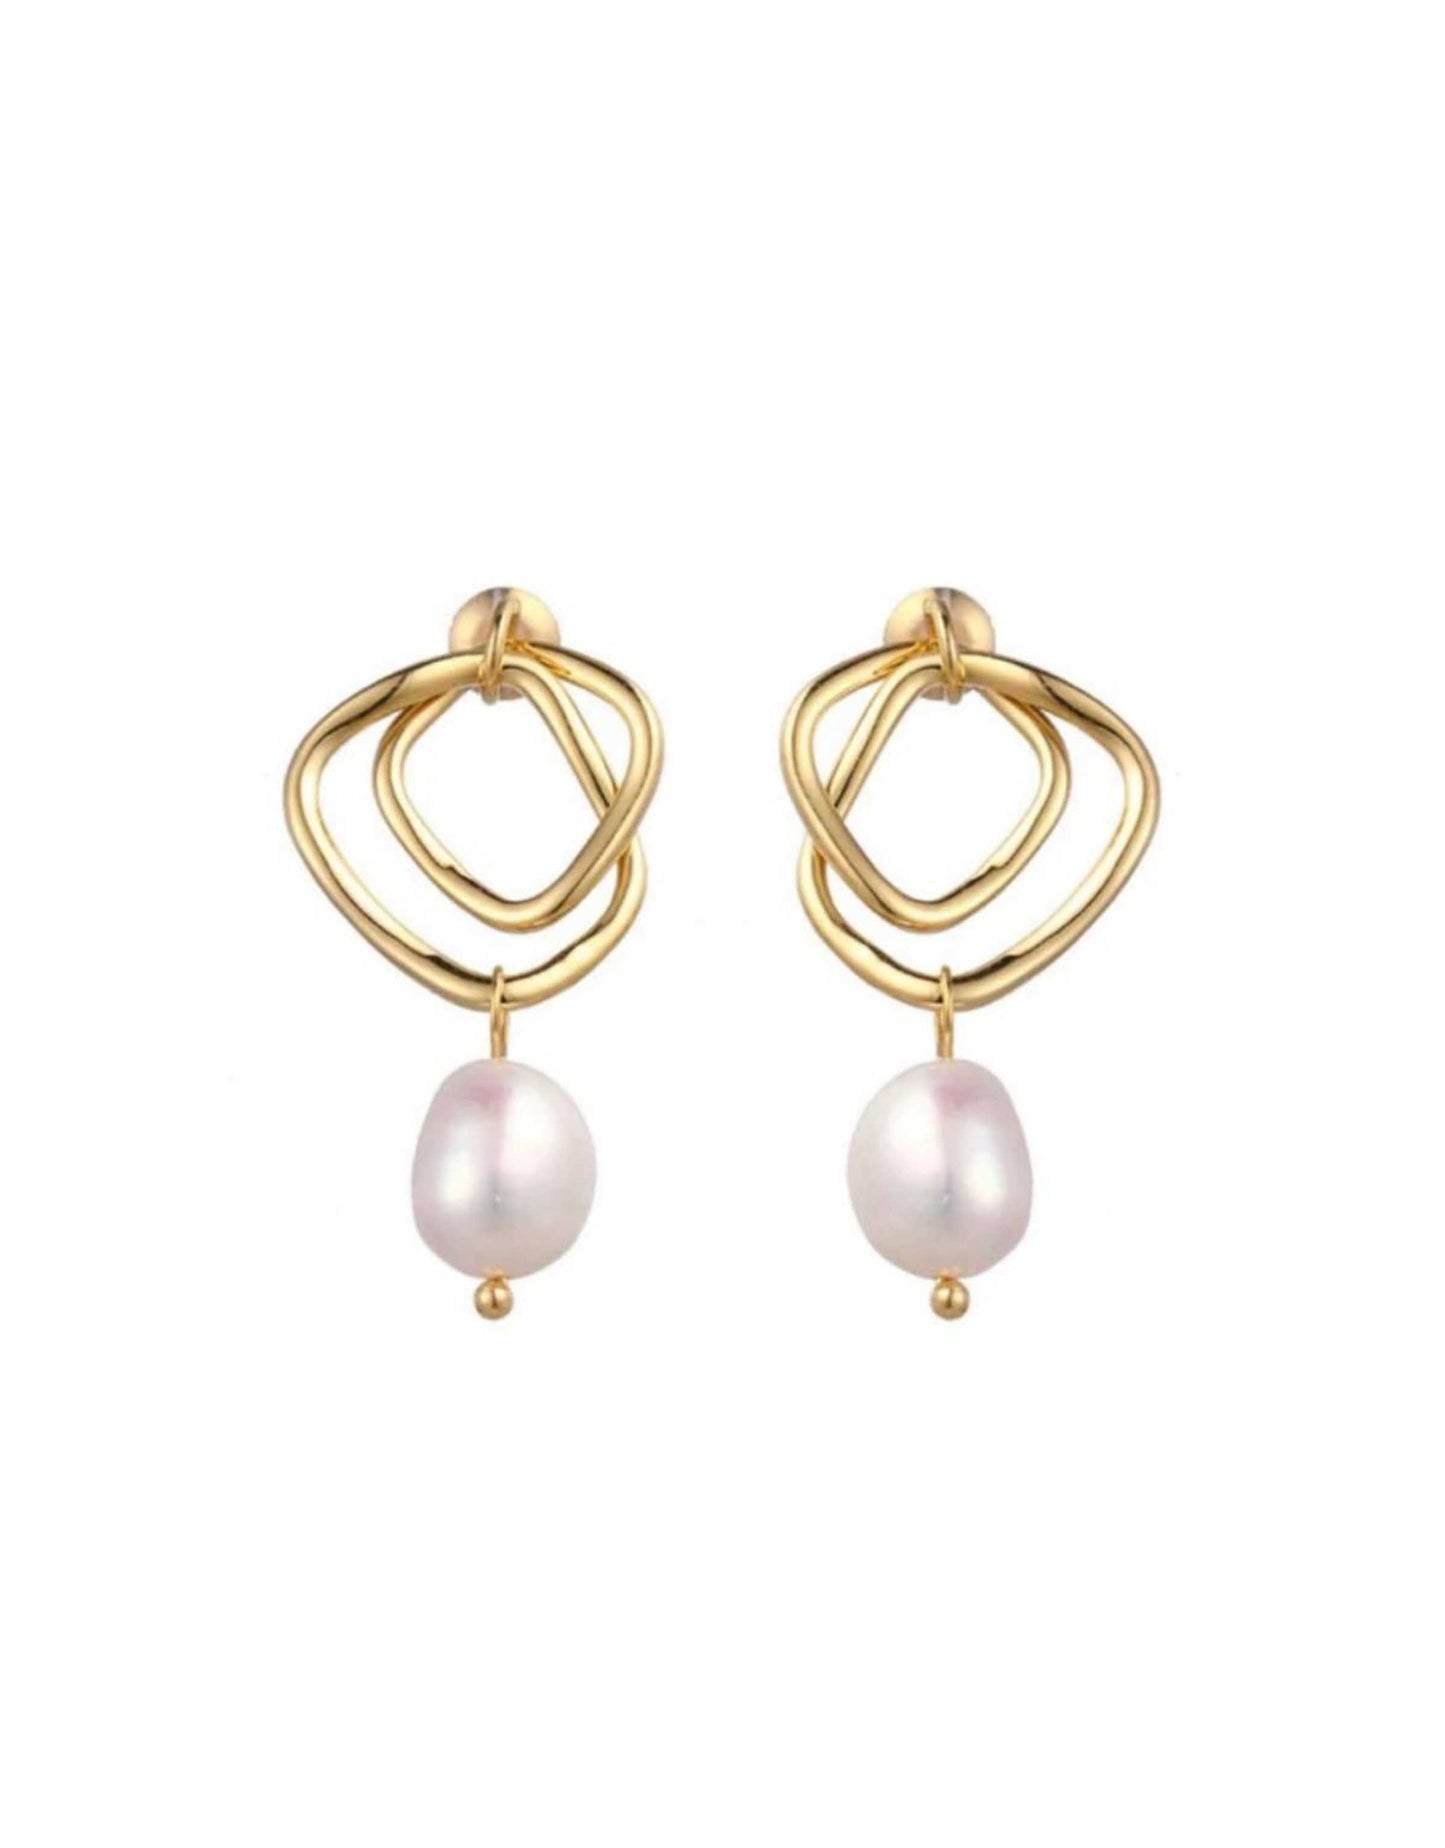 JT Luxe - Milano Pearl Earrings, 14k Gold Plated